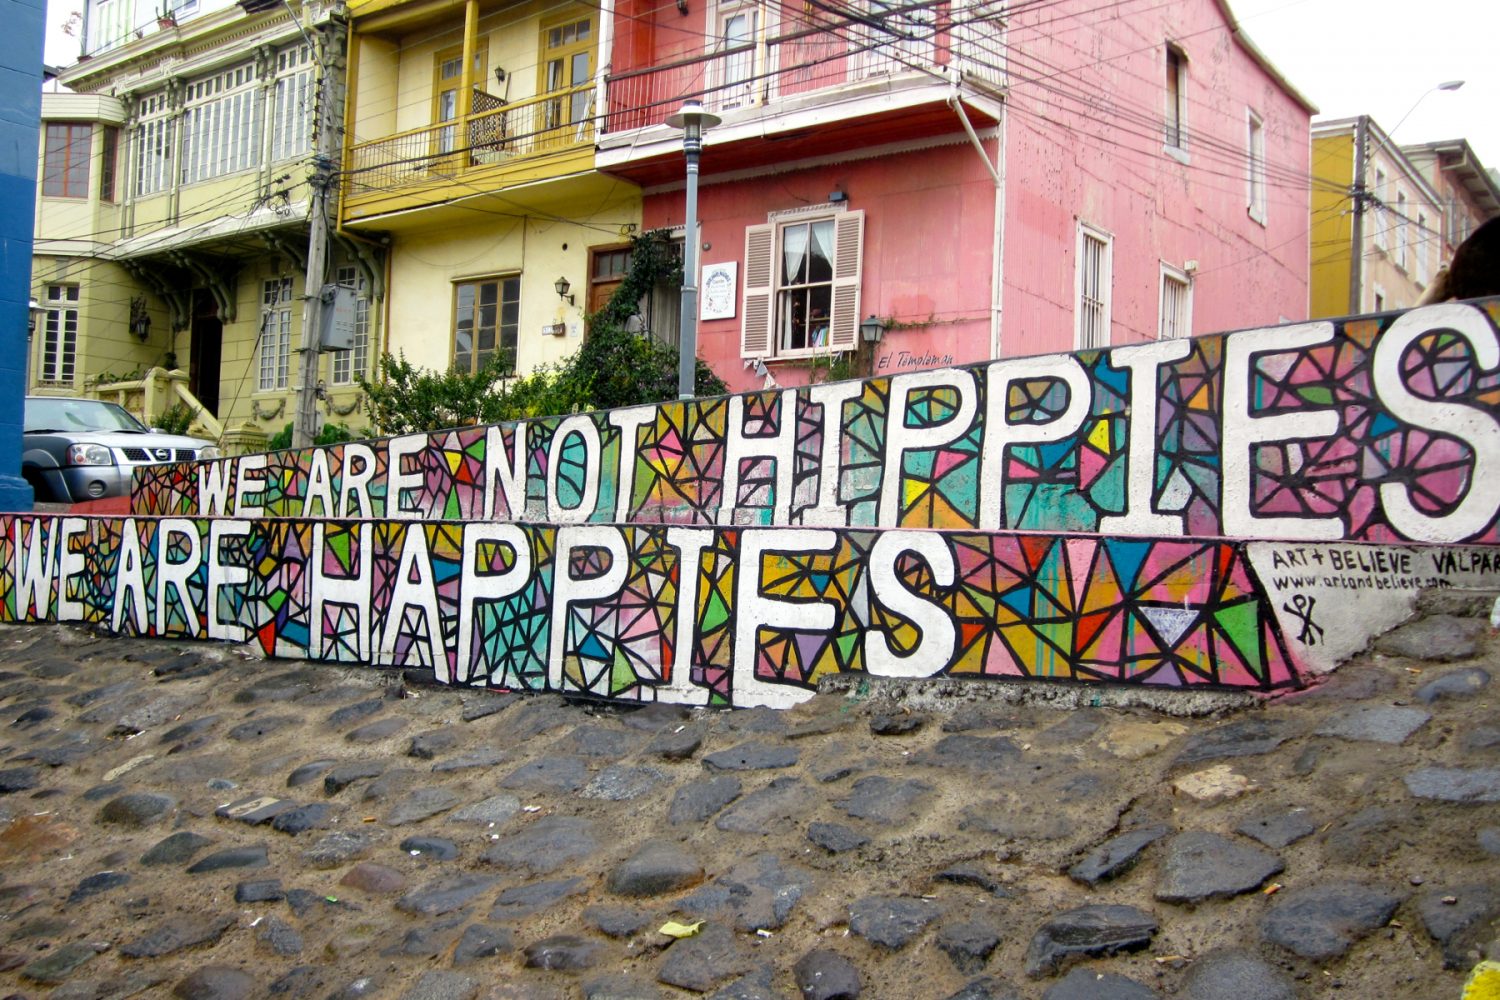 We are not hippies we are happies